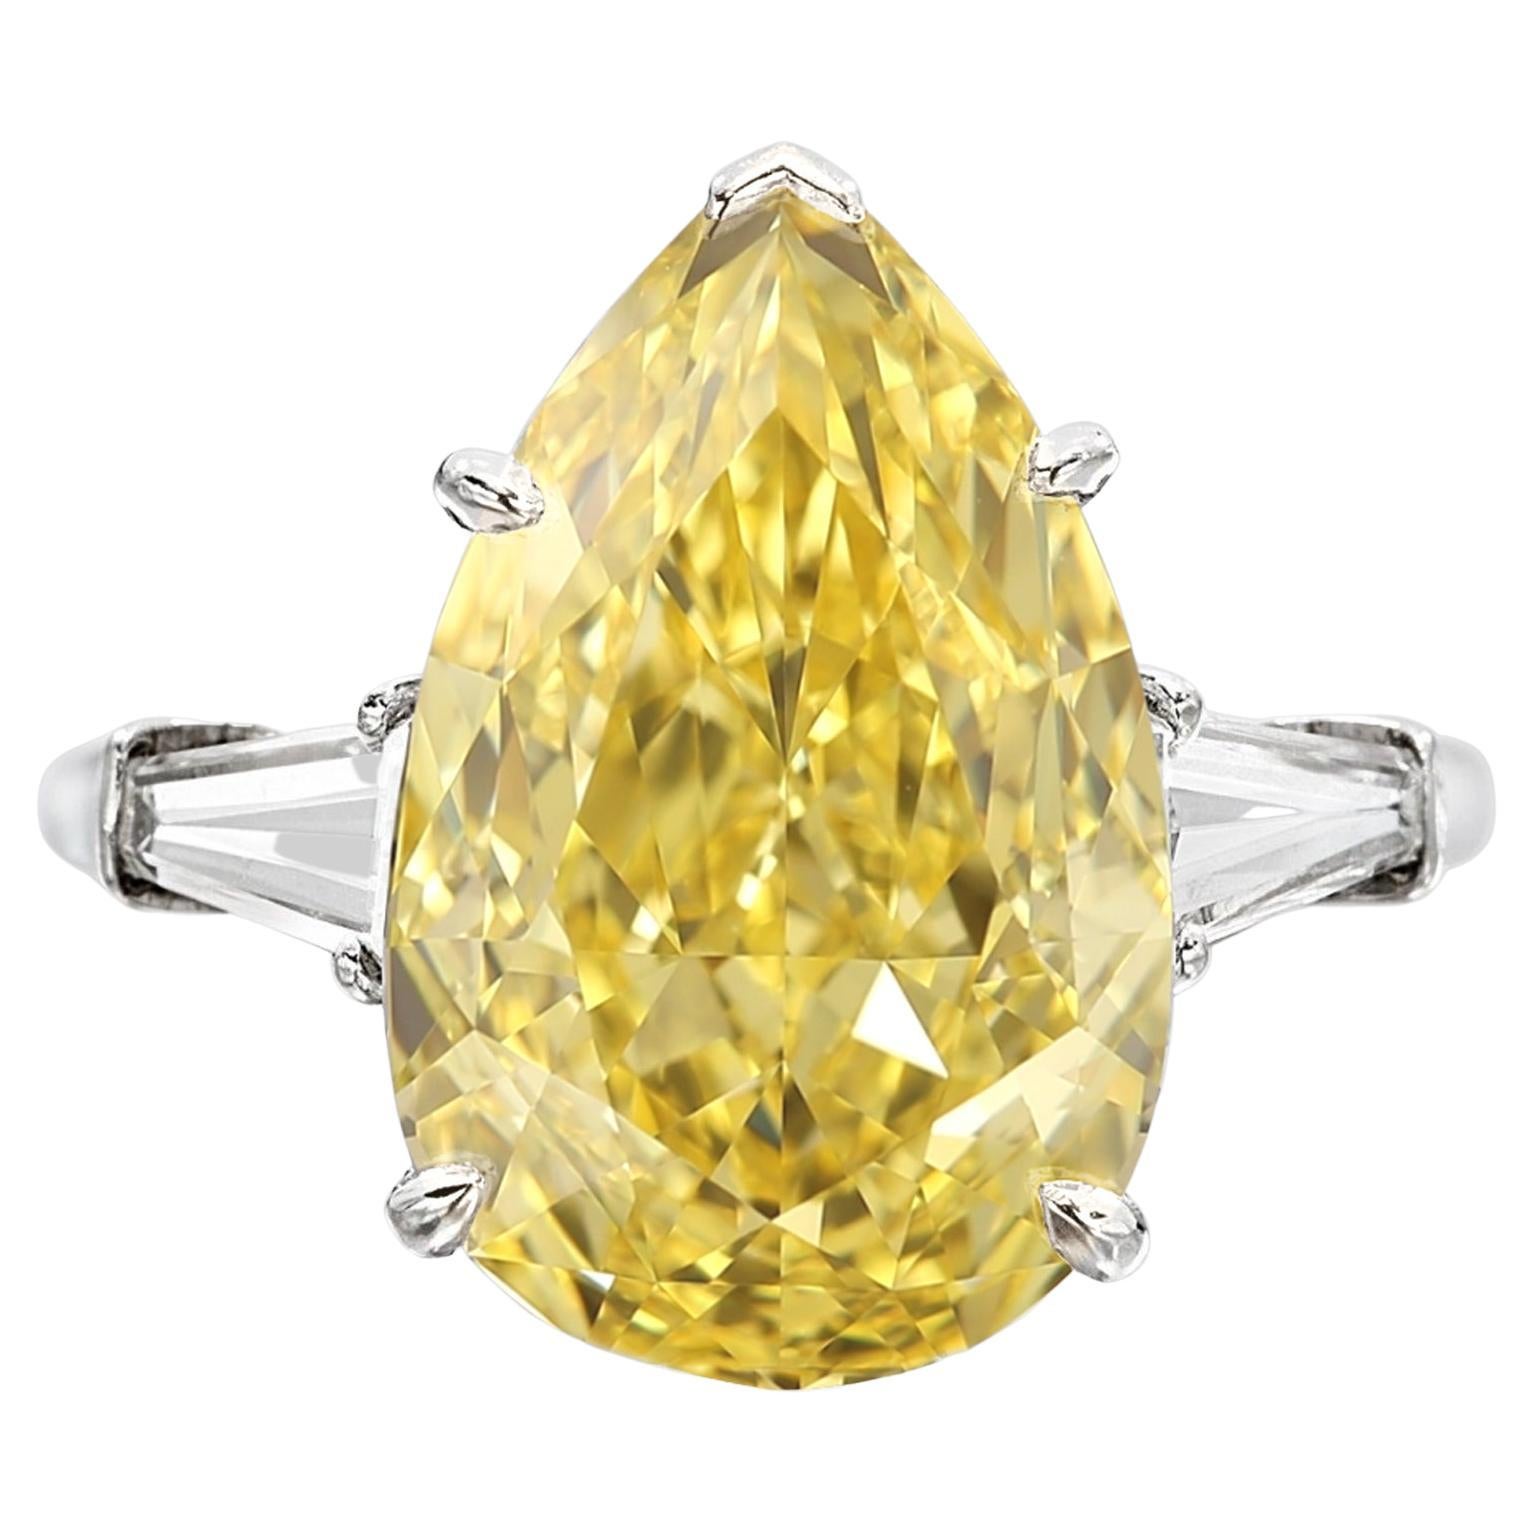 GIA Certified 5.09 Carat Fancy Yellow Diamond Ring For Sale